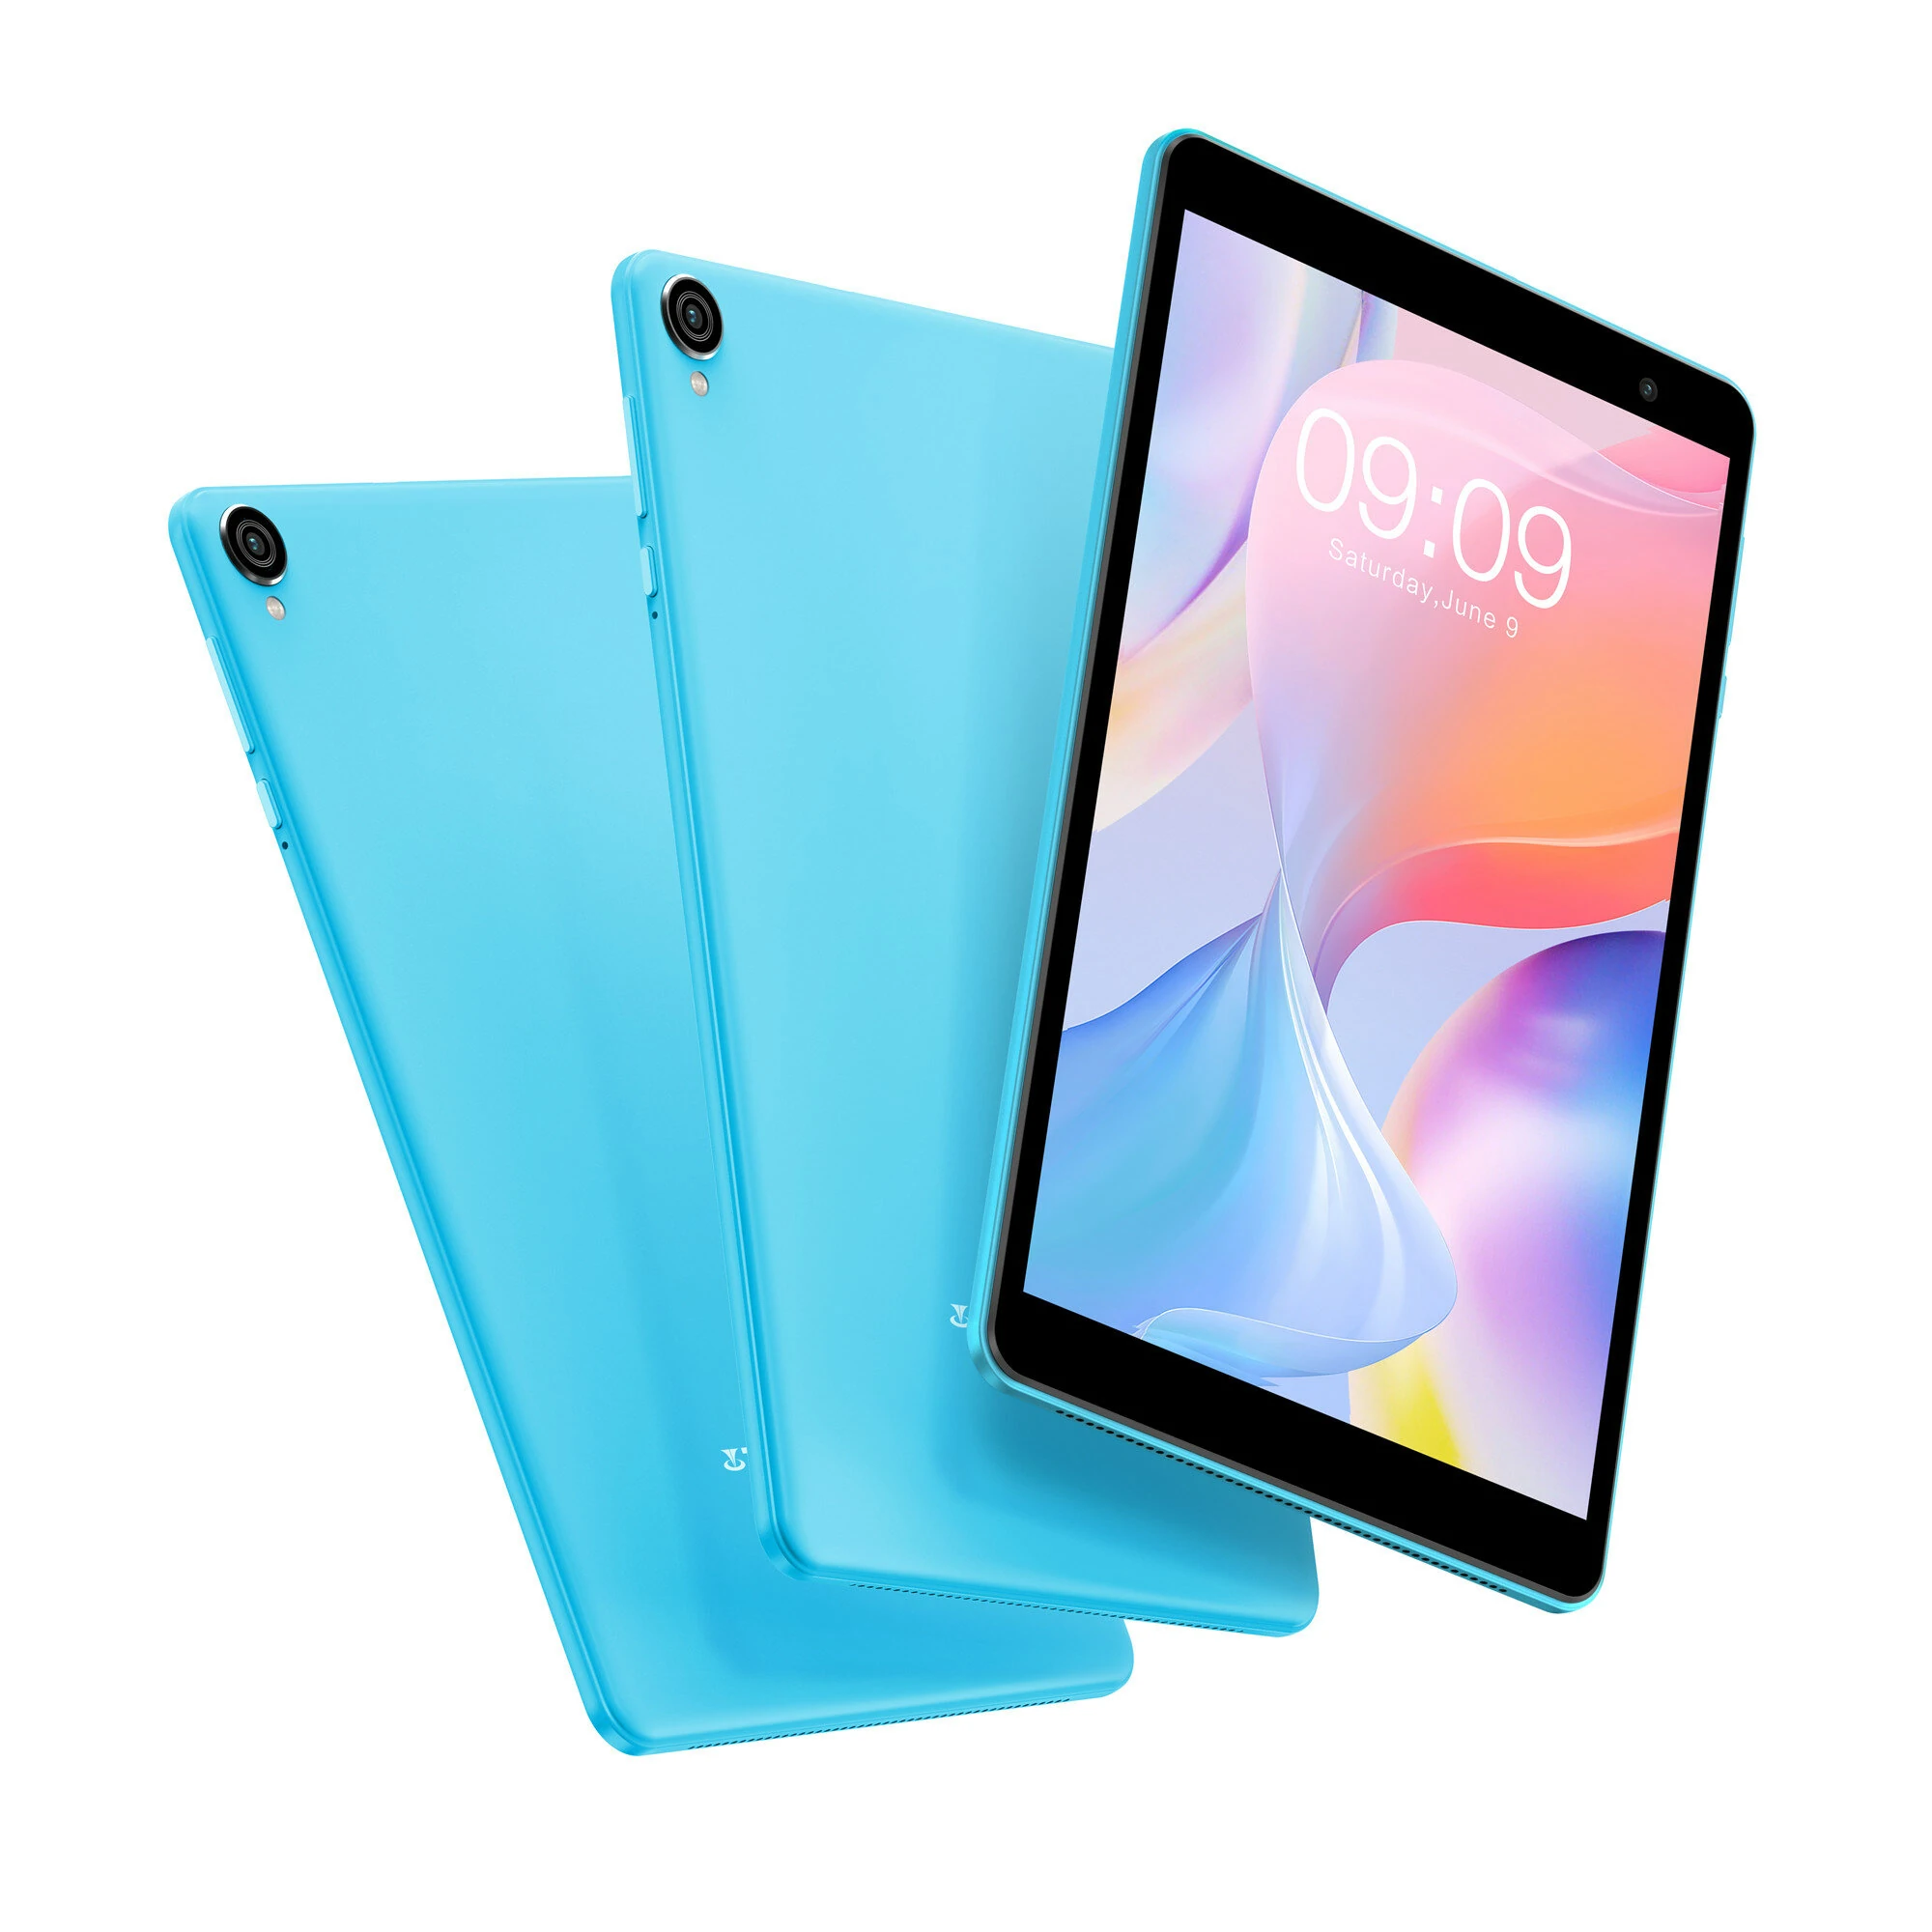 Teclast P80T – cheap quad-core tablet with an 8-inch display